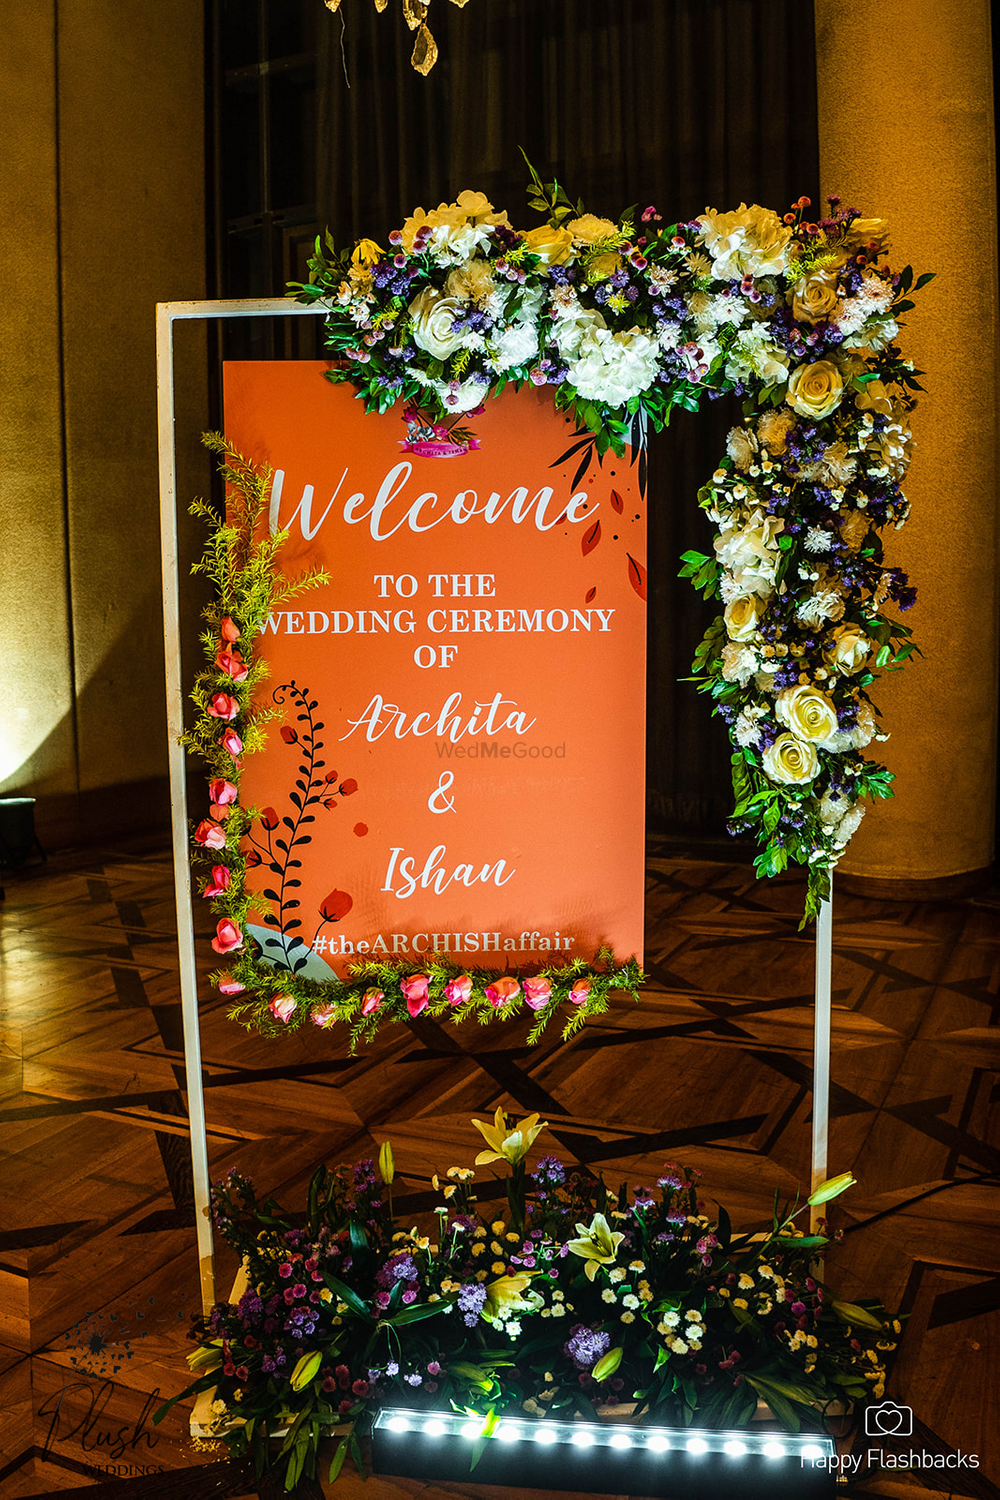 Photo From Archita & Ishan - By Plush | Events & Weddings